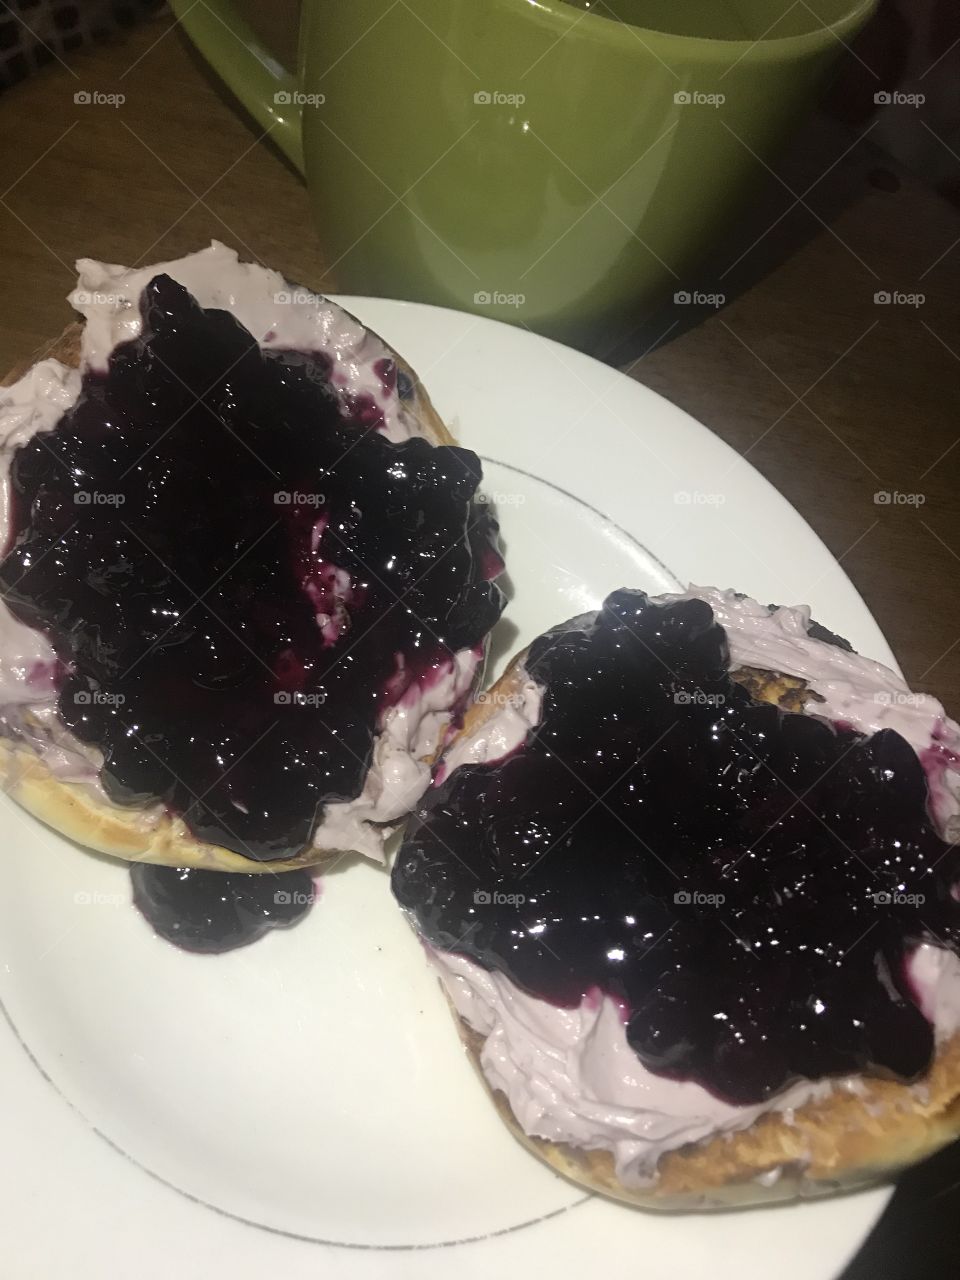 Made my OWN blueberry jam yummy